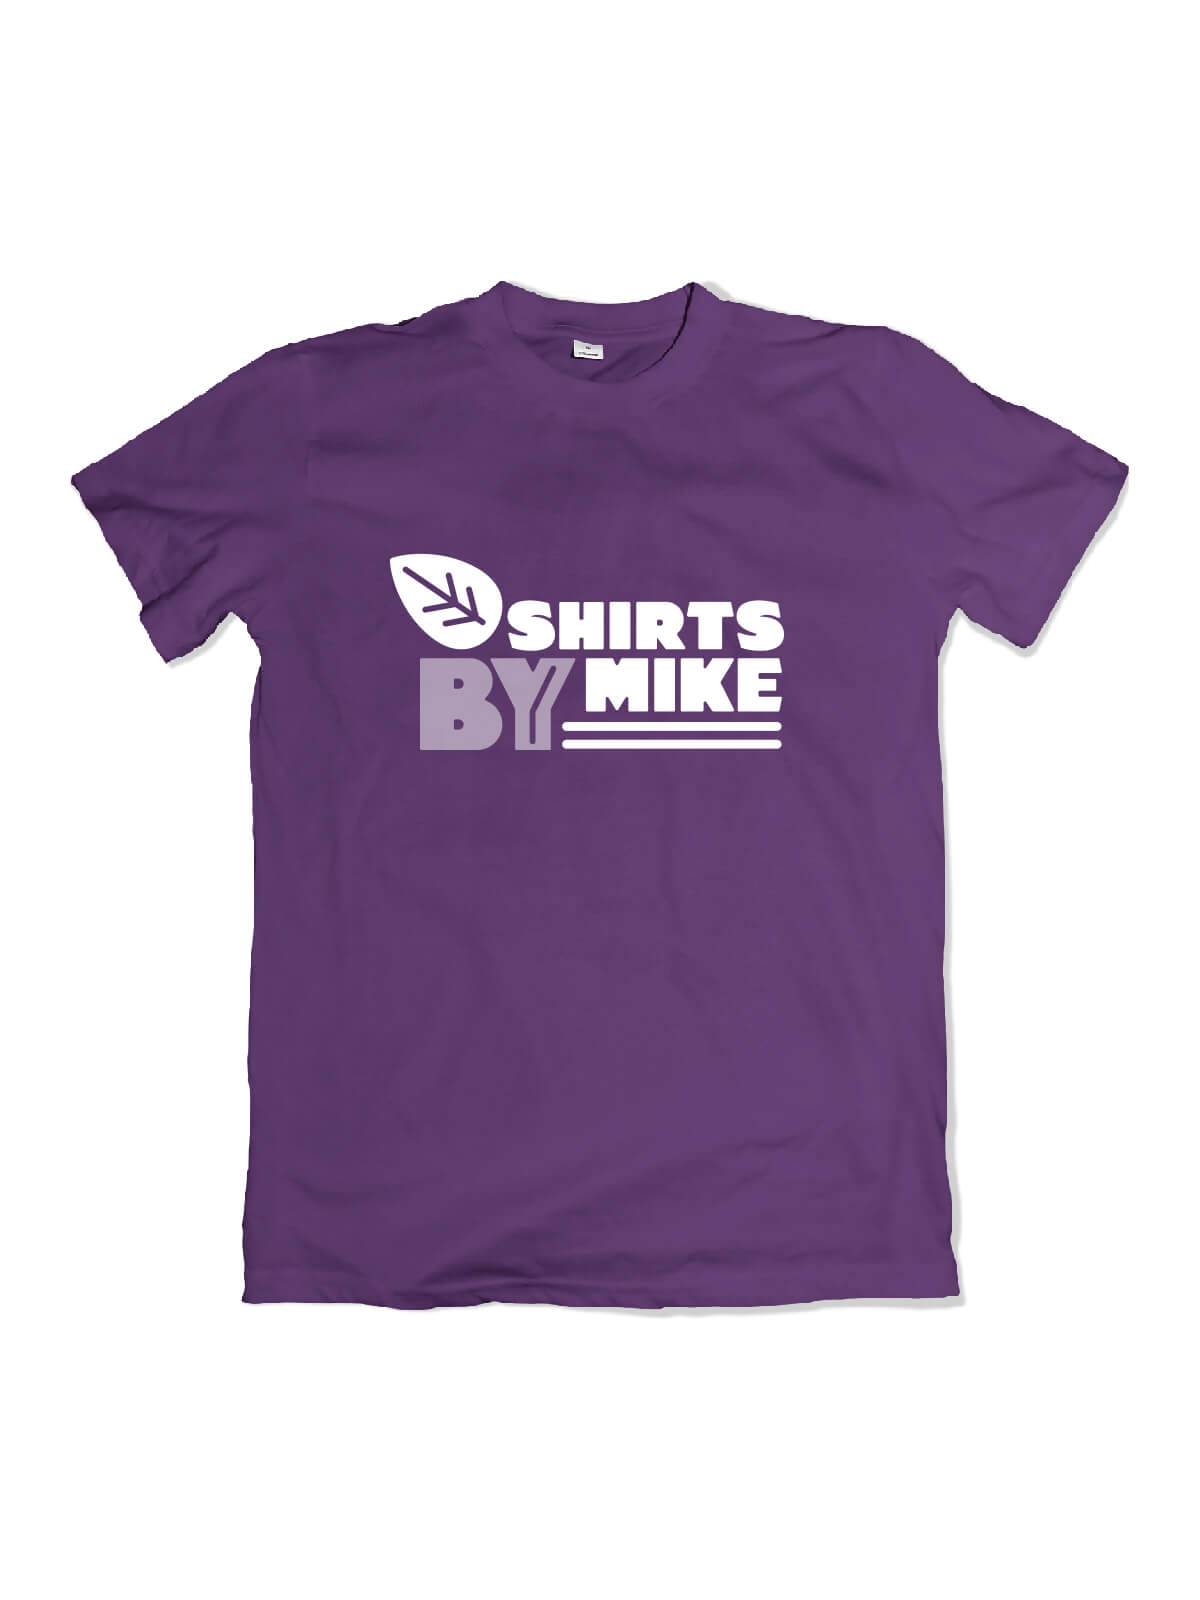 Purple t-shirt with Shirts By Mike logo